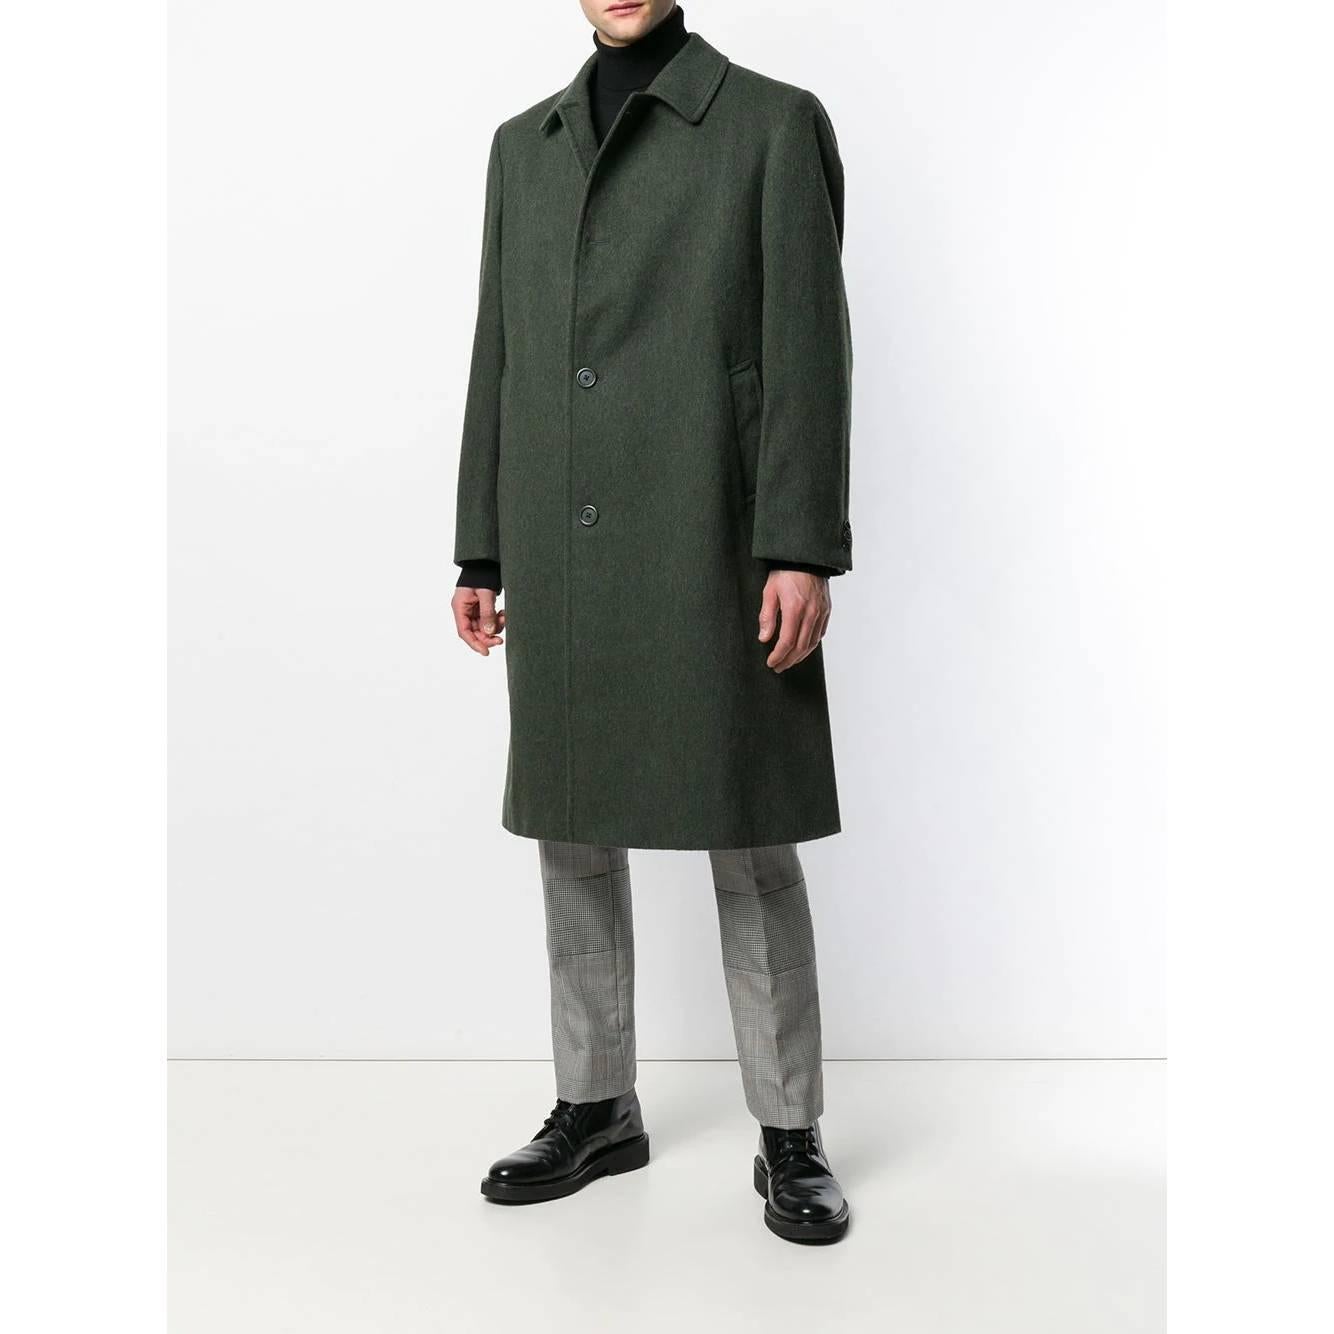 A.N.G.E.L.O. Vintage - ITALY
Aquascutum coat in green virgin wool. Classic collar, front button closure, two welt pockets and back vent. Lined interior.

Years: 70s

Made in UK

Size: L

Flat measurements

Height: 113 cm
Bust: 57 cm
Shoulder: 44